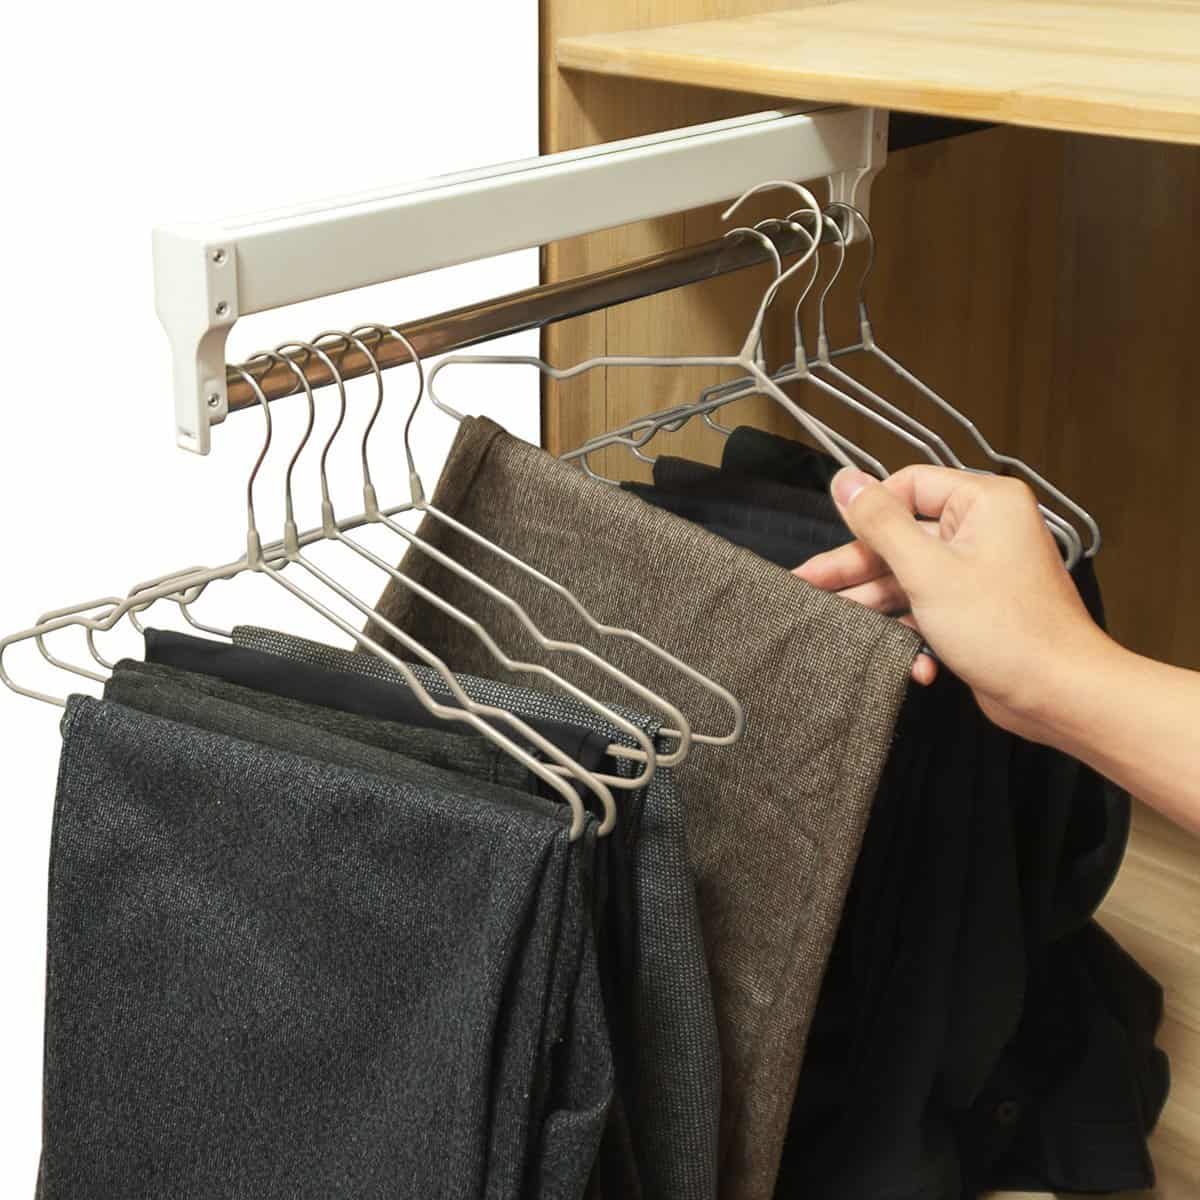 Pull Out Clothes Hanger